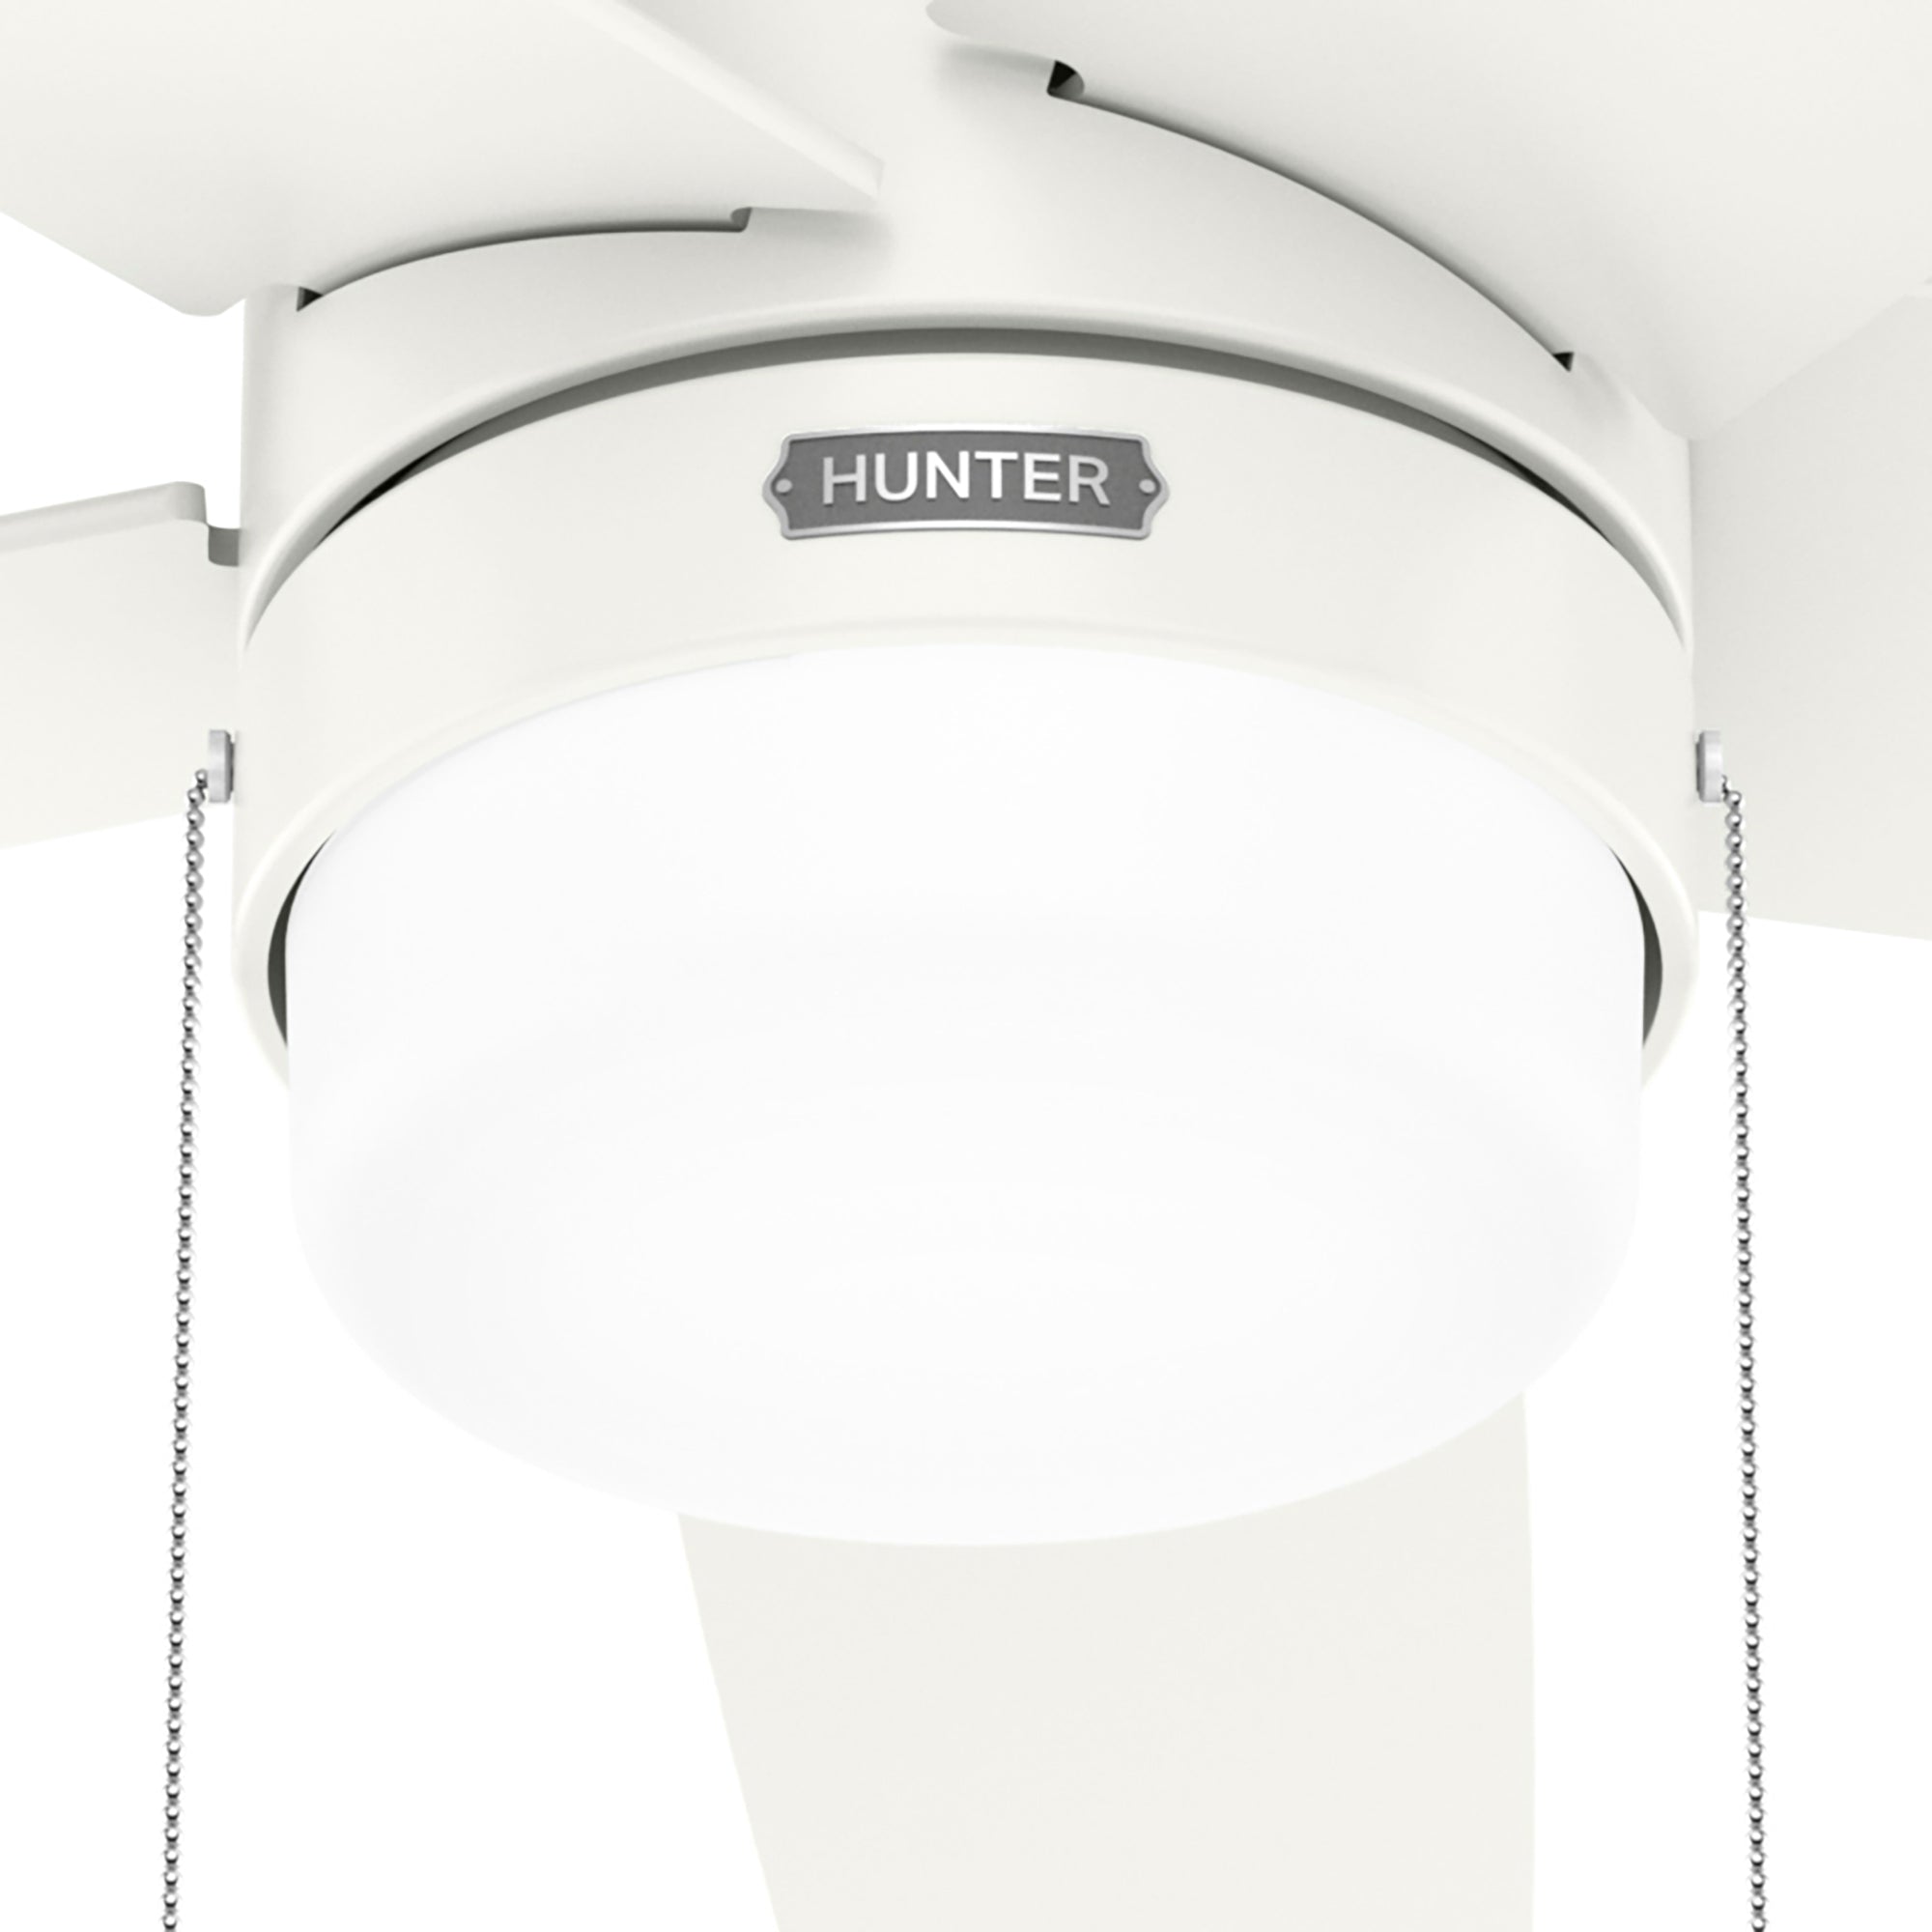 Hunter 52 inch Bardot Ceiling Fan with LED Light Kit and Pull Chain